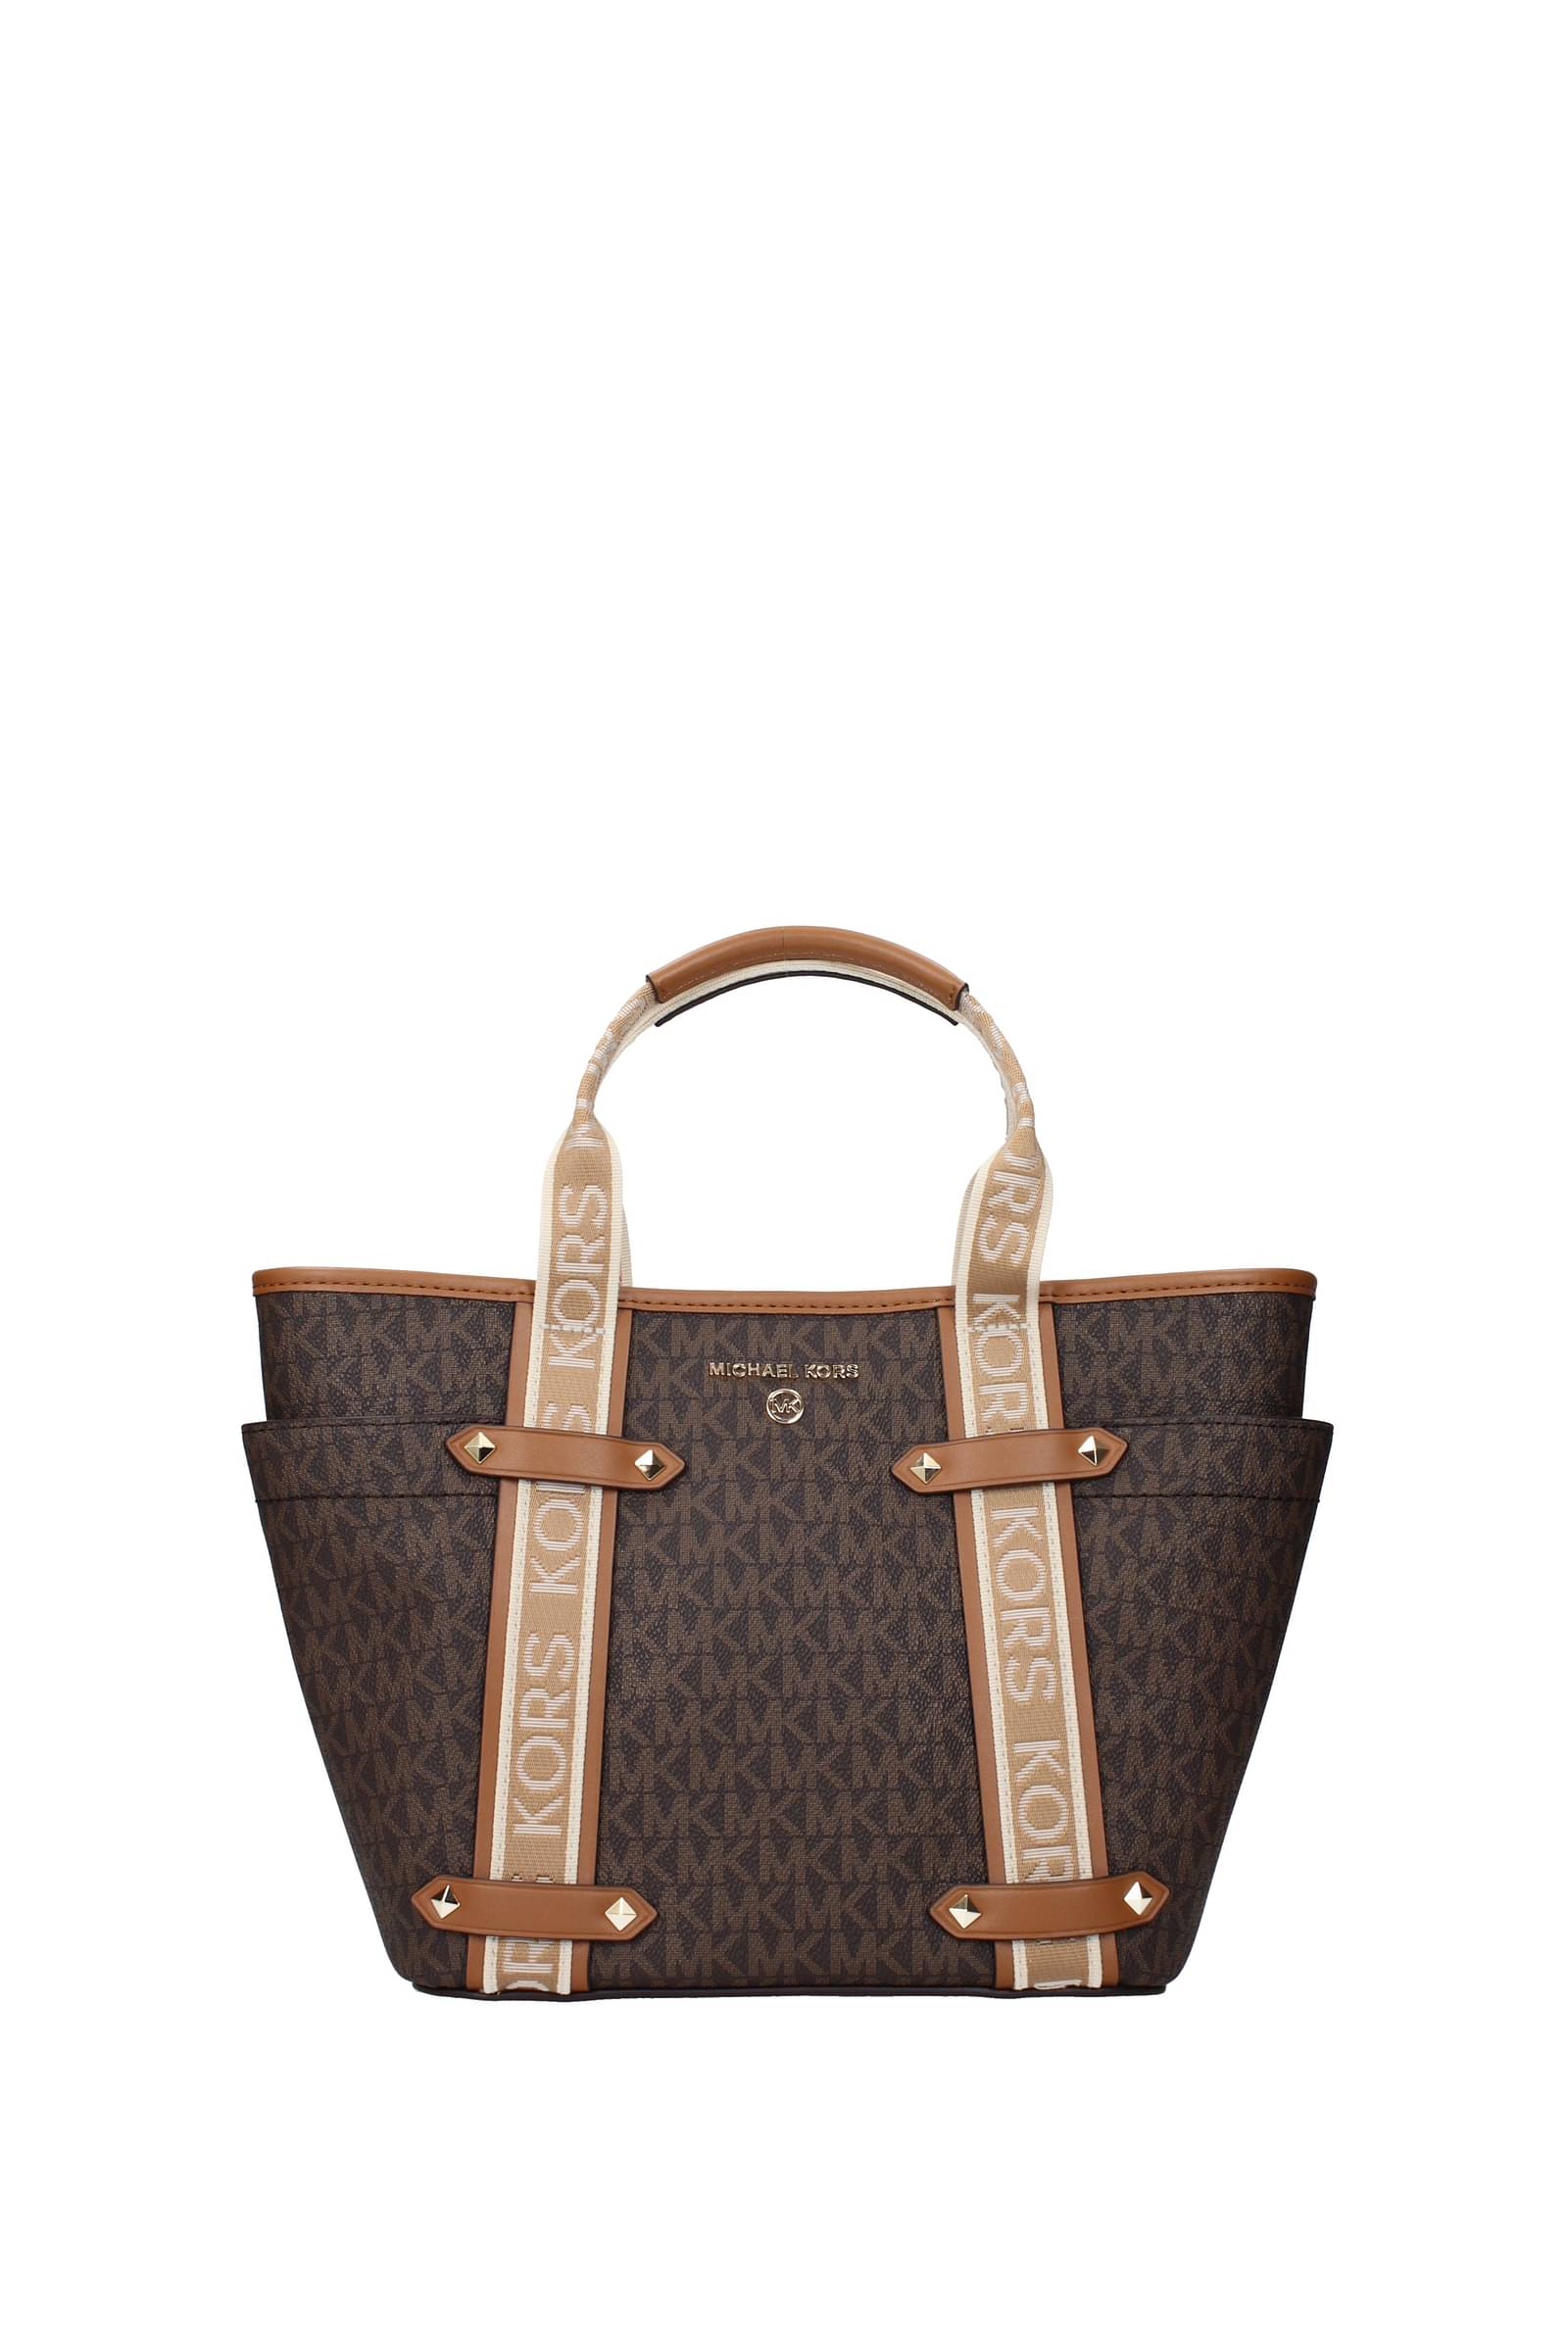 Bags and Accessories on Sale at Michael Kors Outlet Online 